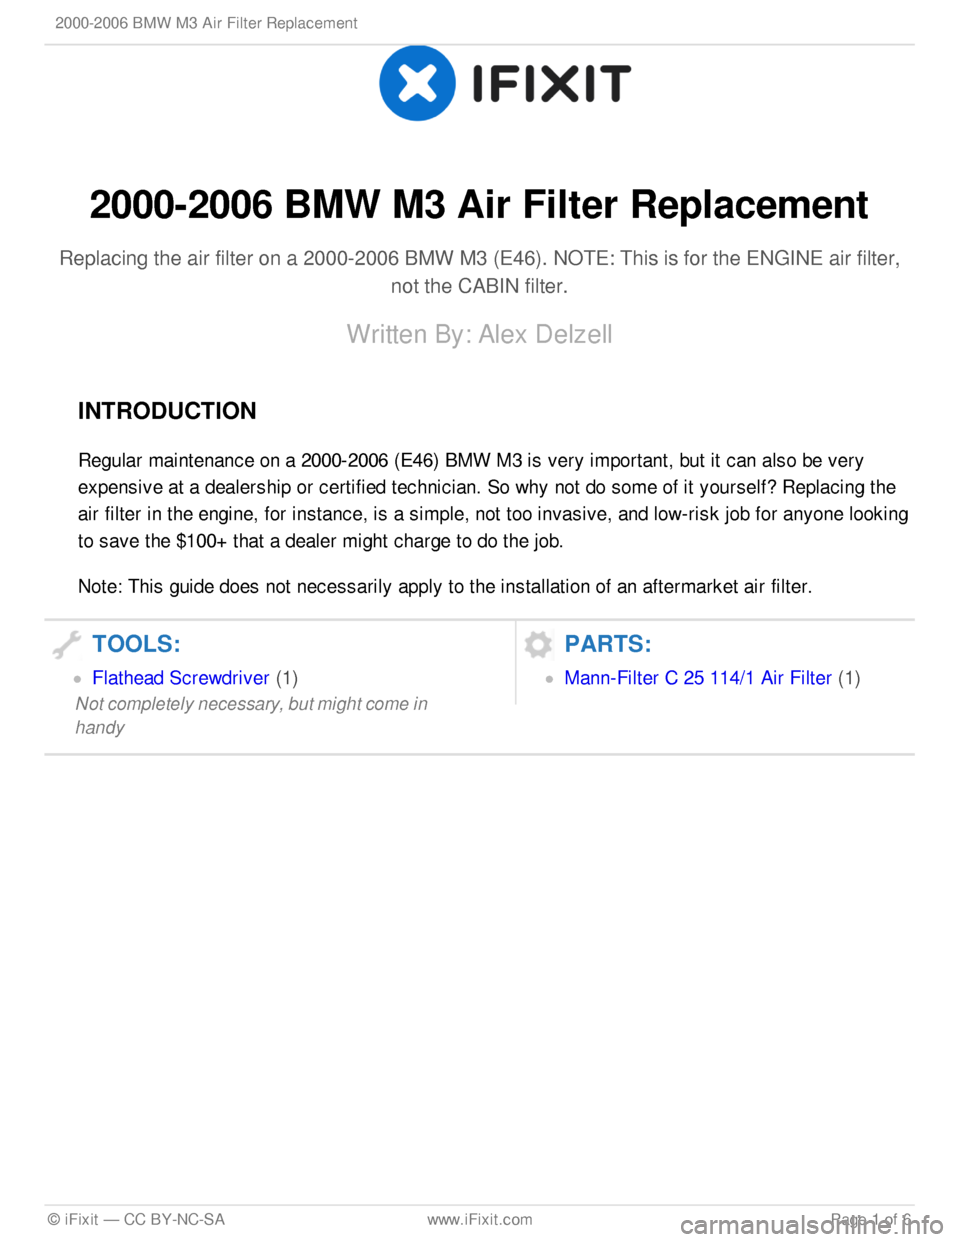 BMW M3 COUPE 2004 E46 Air Filter Replacement 2000-2 006 B M W  M 3 A ir  F ilt e r R ep la cem en t
Repla cin g th e a ir  filt e r o n a  2 000-2 006 B M W  M 3 ( E 46). N O TE : T his  is  fo r th e E N G IN E a ir  filt e r,
not th e C ABIN  